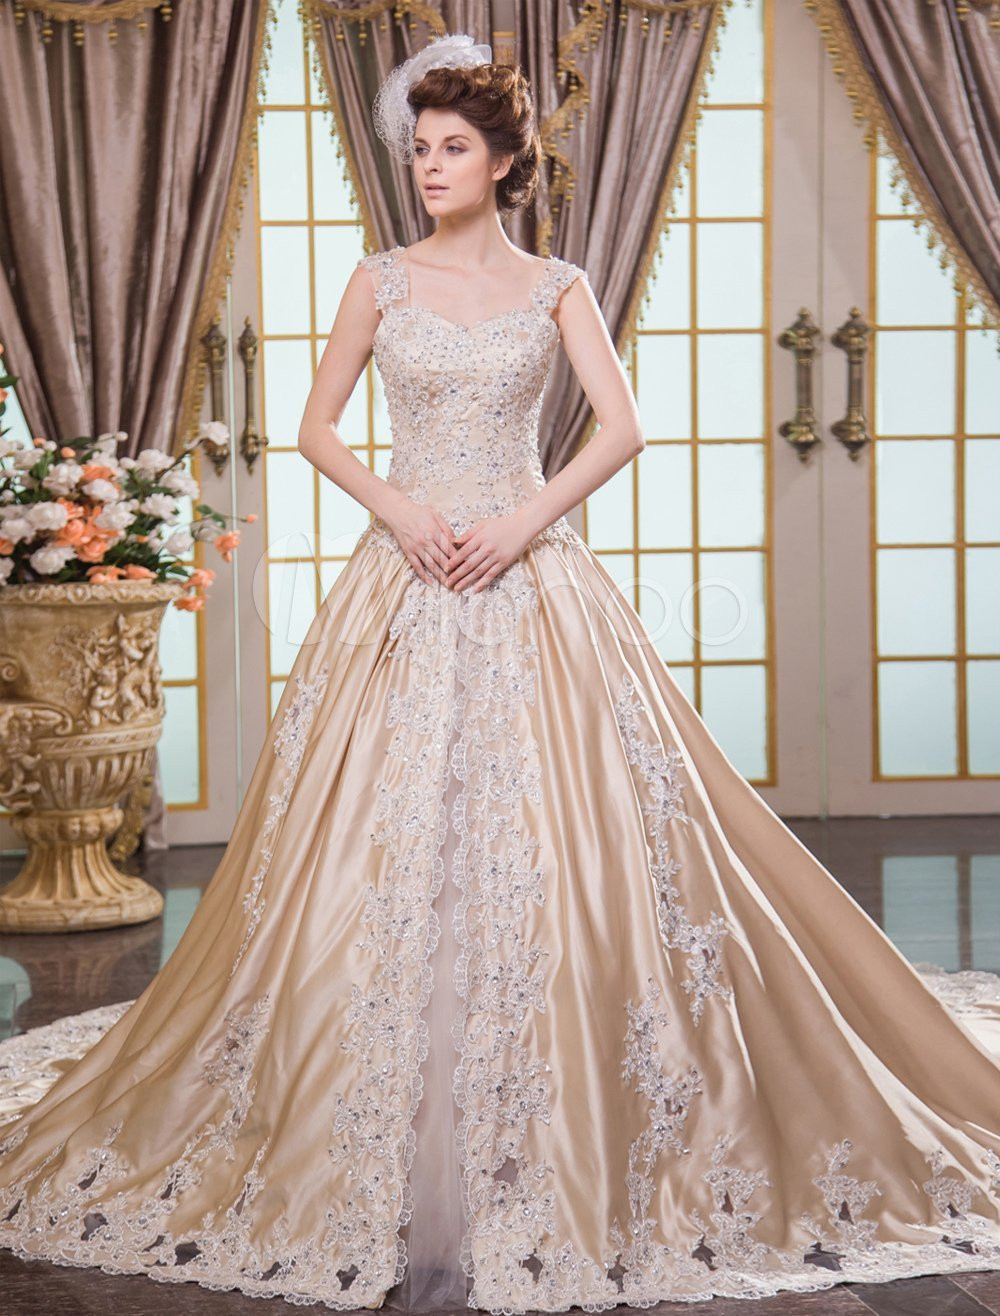 Champagne Wedding Dress
 How to Get the Best Champagne Wedding Dresses Wedding